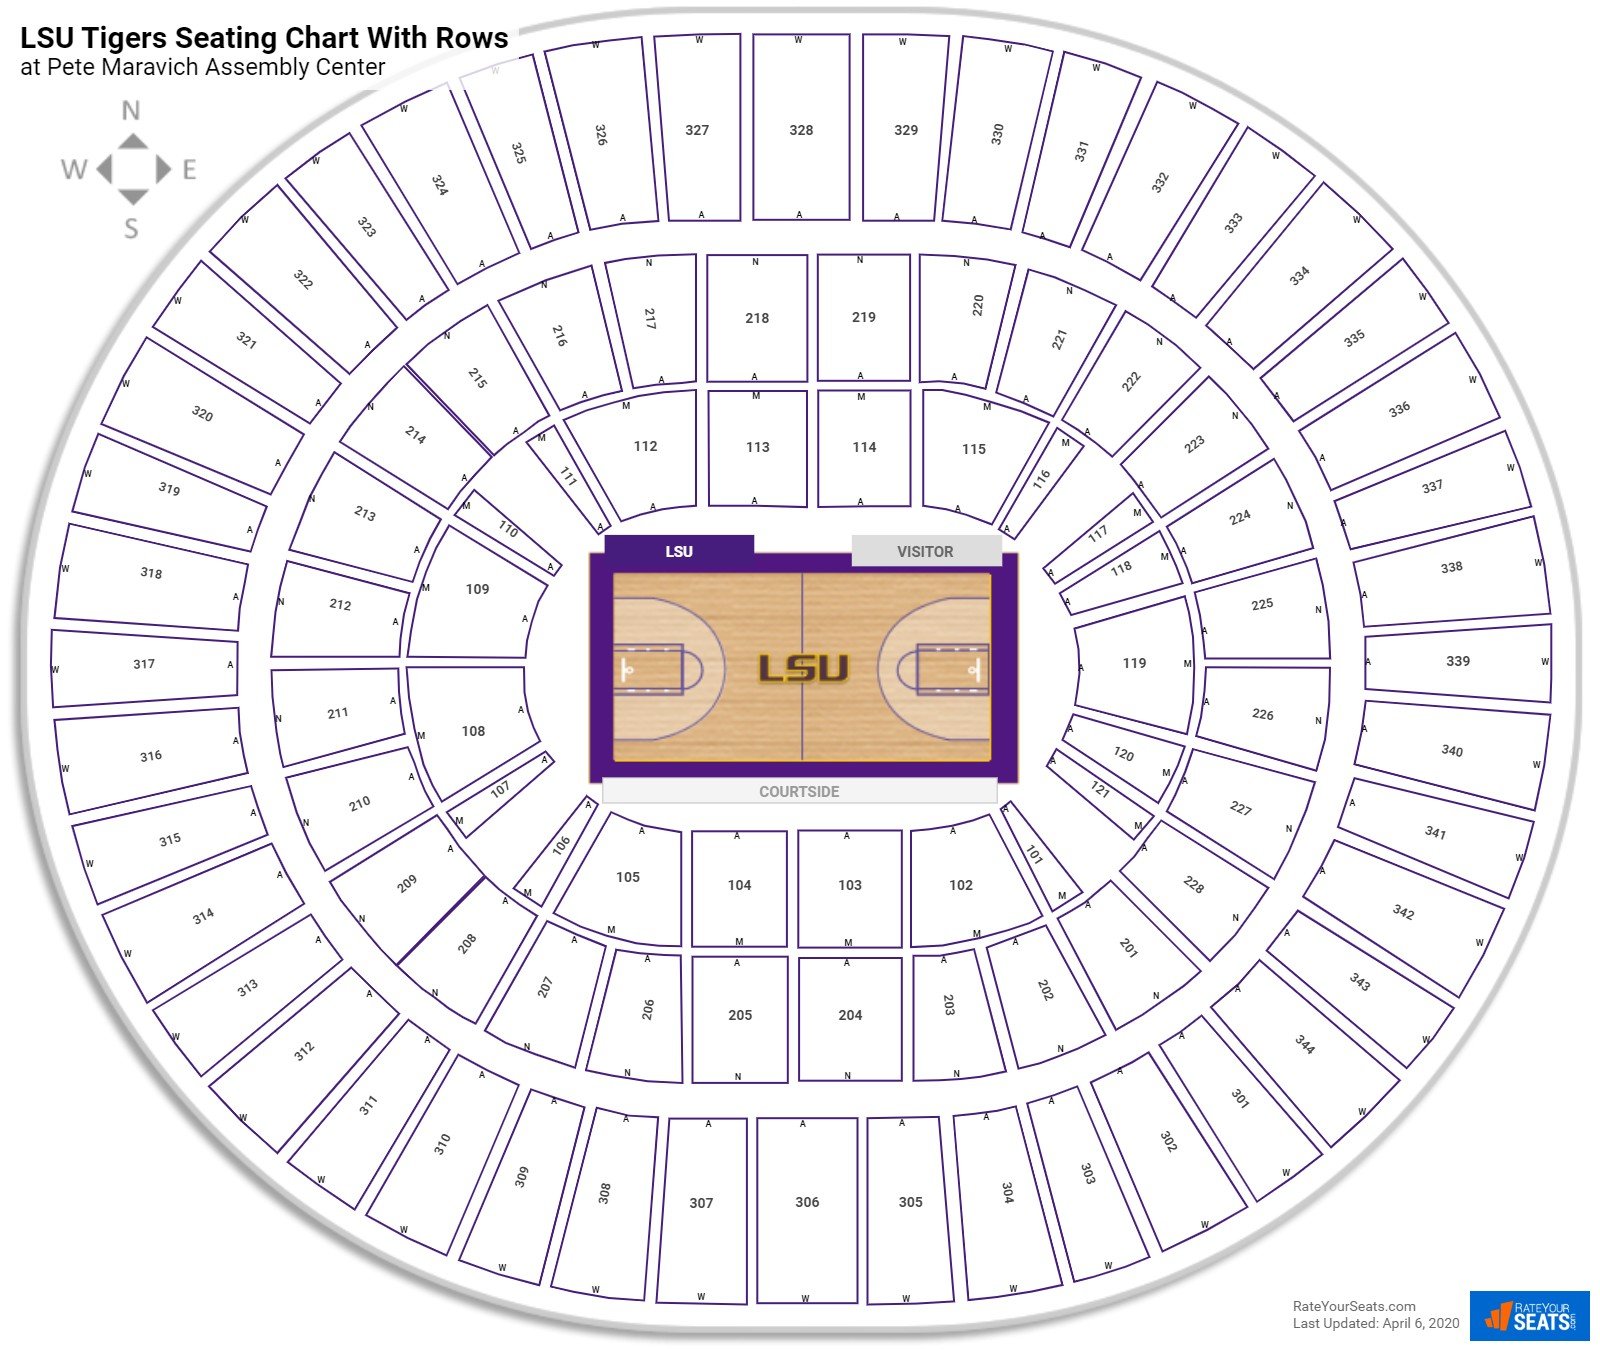 Pete Maravich Assembly Center Seating Charts Rateyourseats Com.